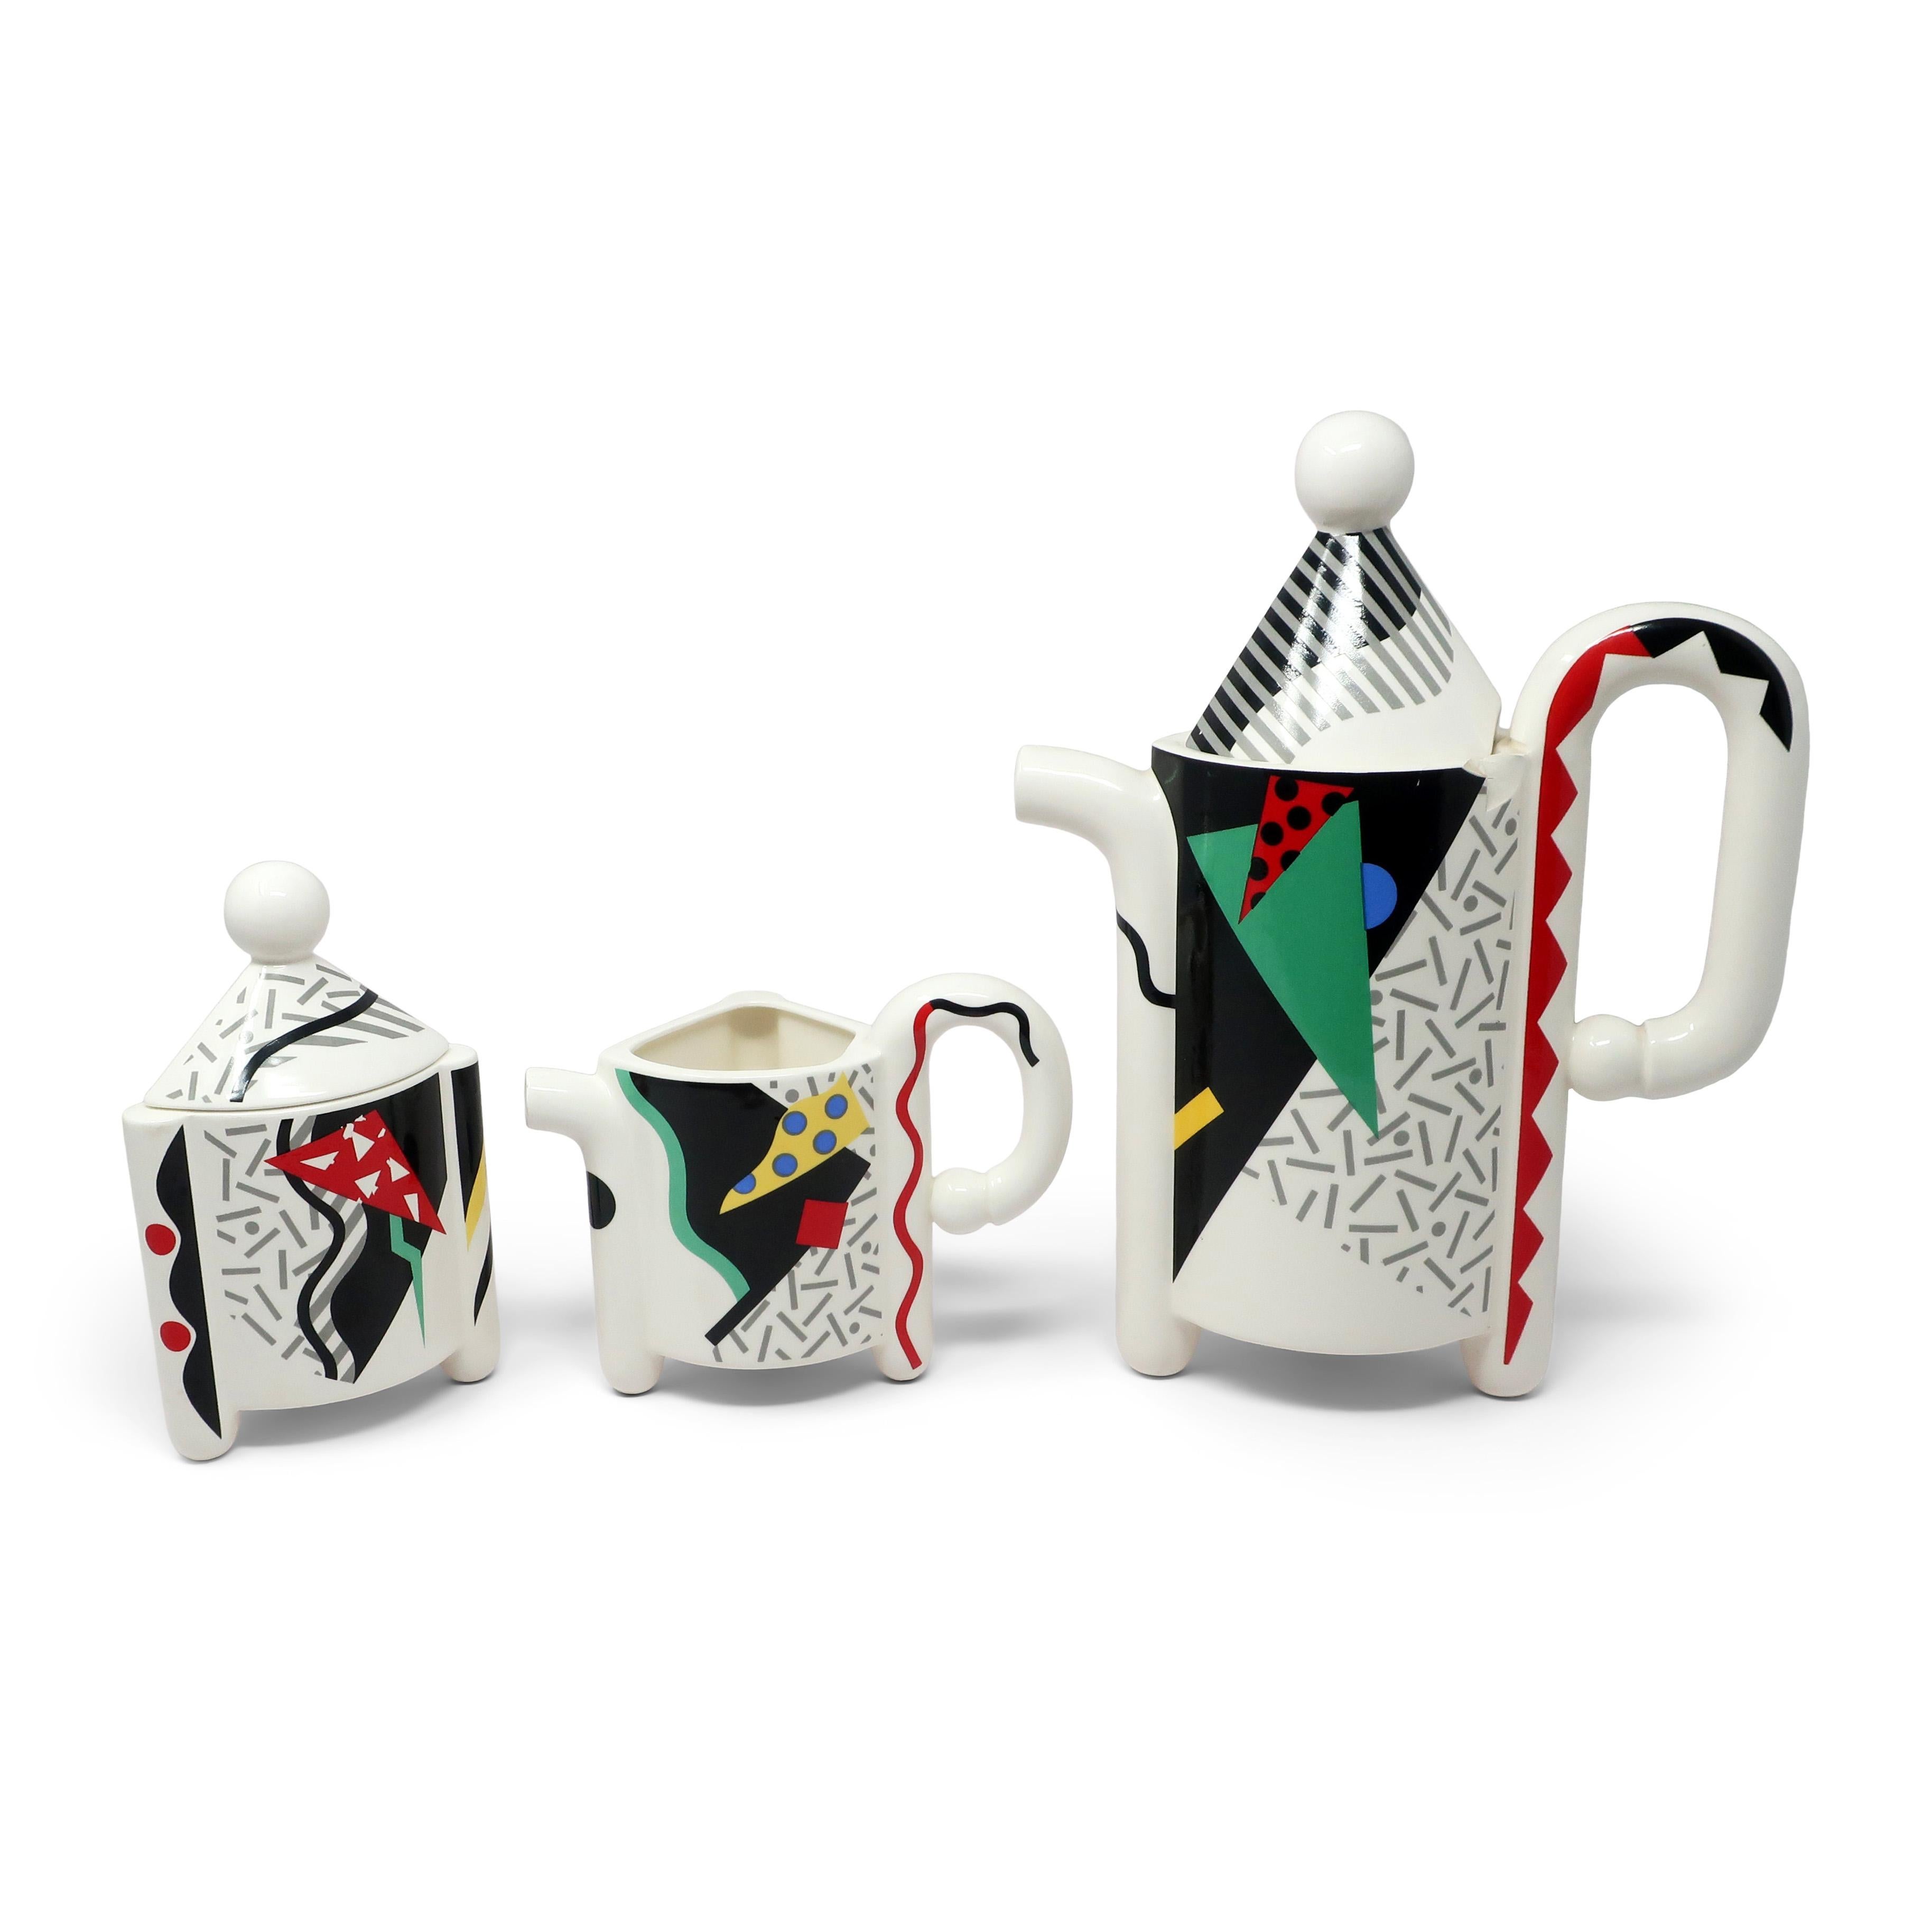 A set of ceramic tea pot, sugar bowl and creamer in the Carnival pattern for Kato Kogei’s Fujimori Collection. Fujimori was born in Japan in 1935 and won the National Art Award when he was just 19. He later worked in Chicago as a ceramics designer